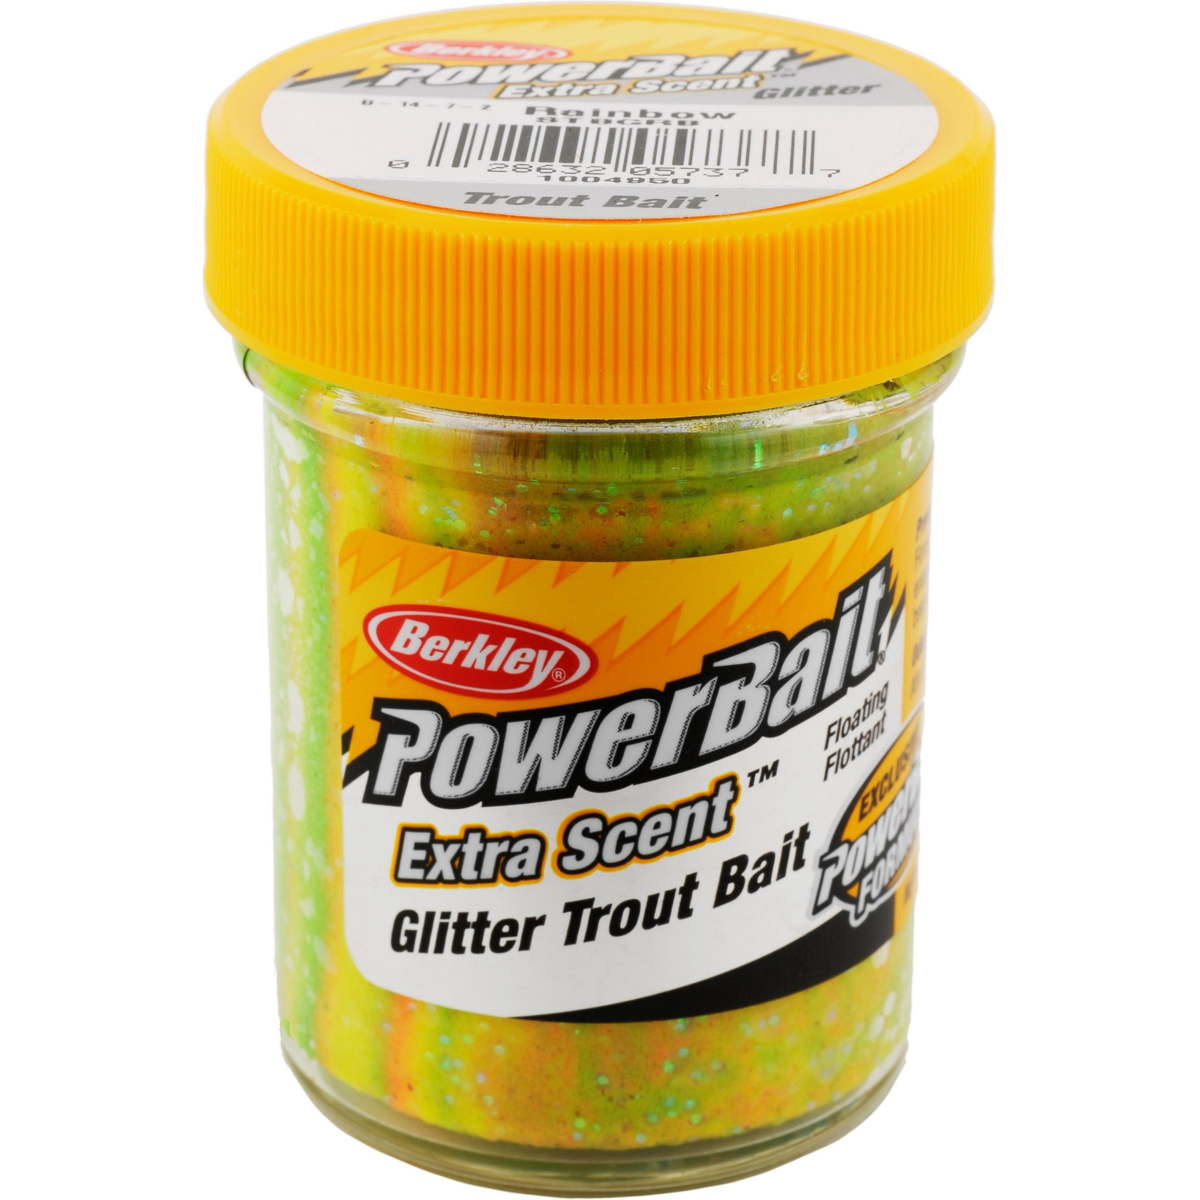 Photo of Berkley PowerBait Glitter Trout Bait for sale at United Tackle Shops.